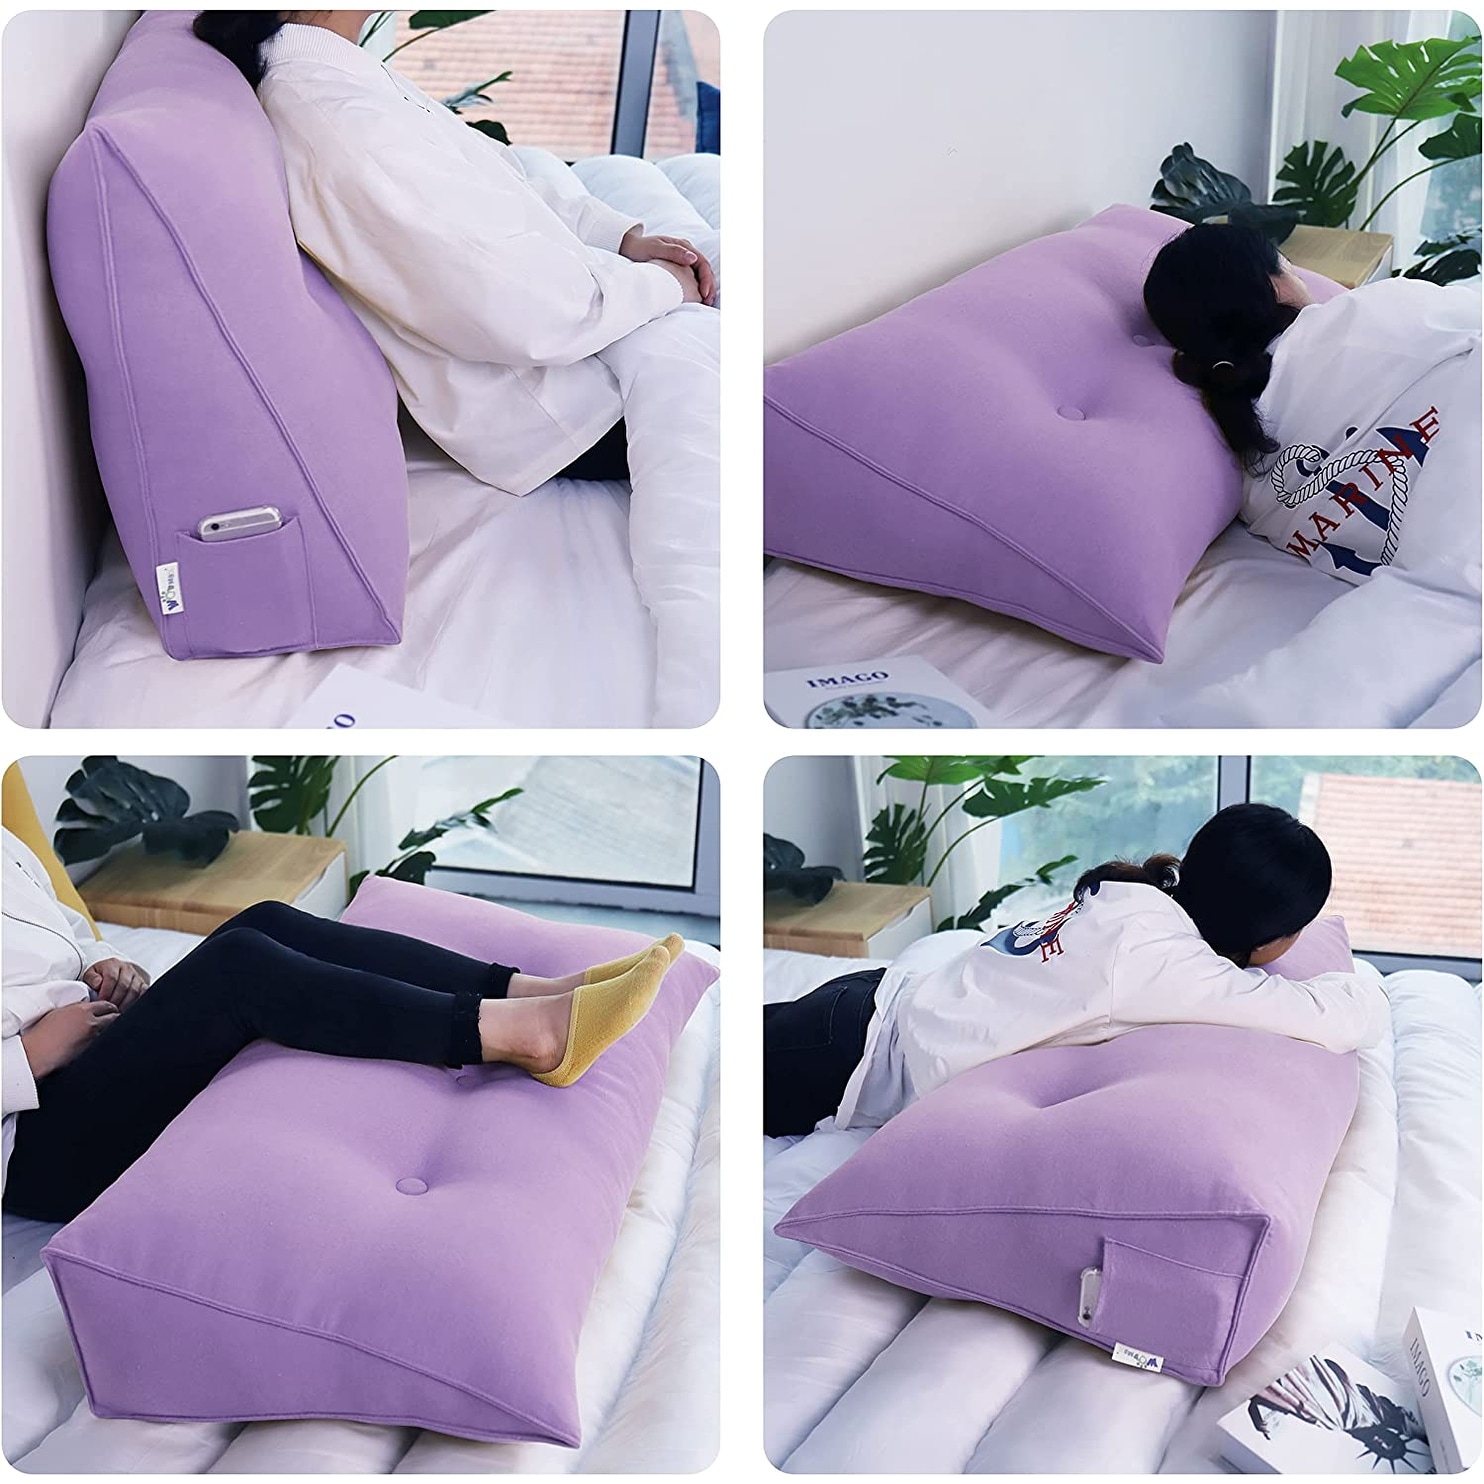 https://ak1.ostkcdn.com/images/products/is/images/direct/3daf61da08fb5ca0713492052c3b366a43b42d74/WOWMAX-Bed-Rest-Wedge-Pillow-Headboard-Reading-TV-Back-Support-Cushion.jpg